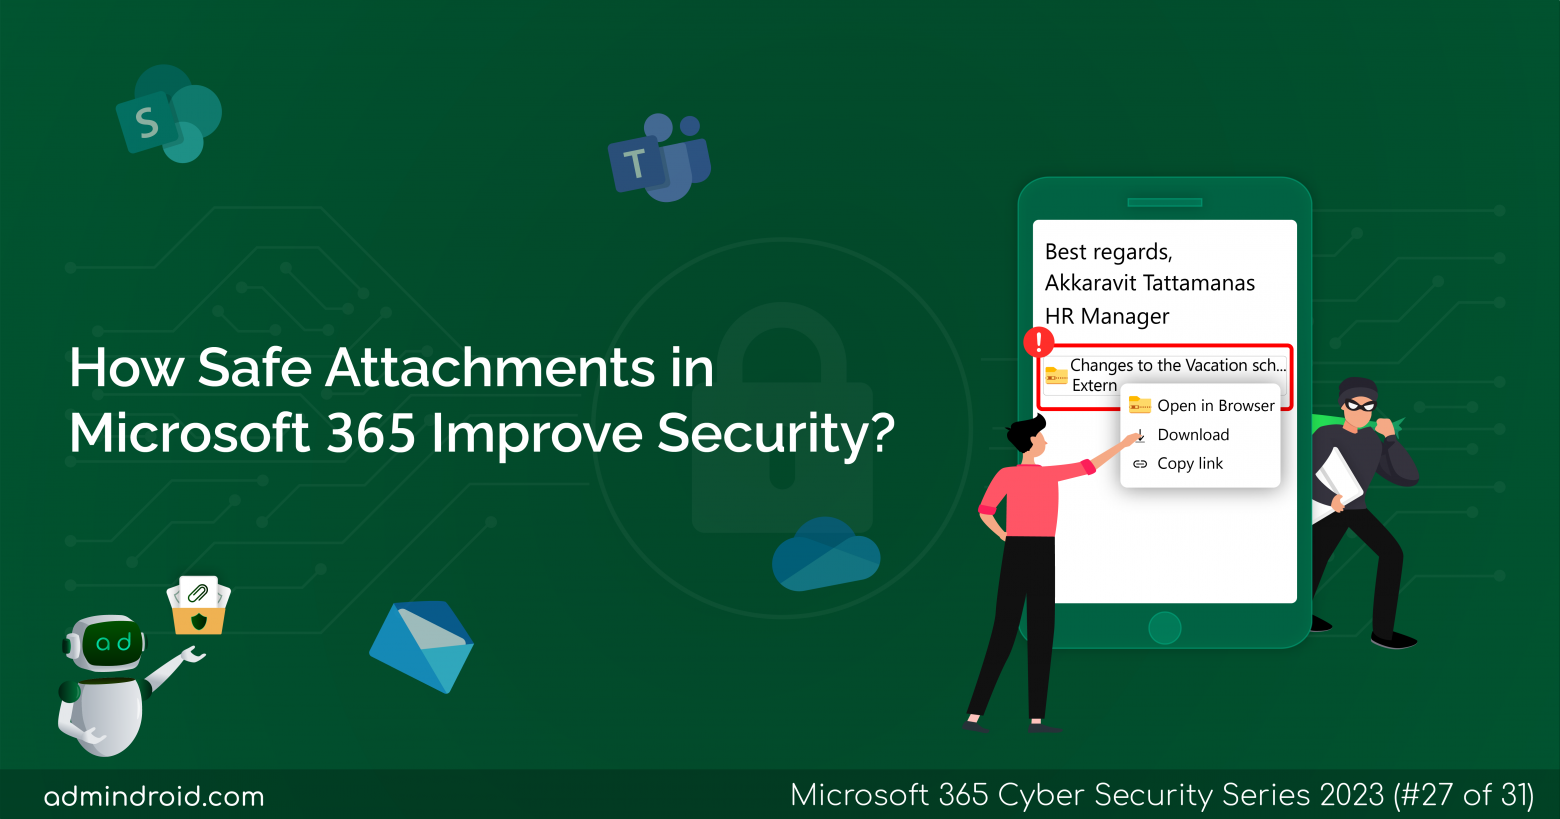 How Safe Attachments in Microsoft 365 Improves Security 